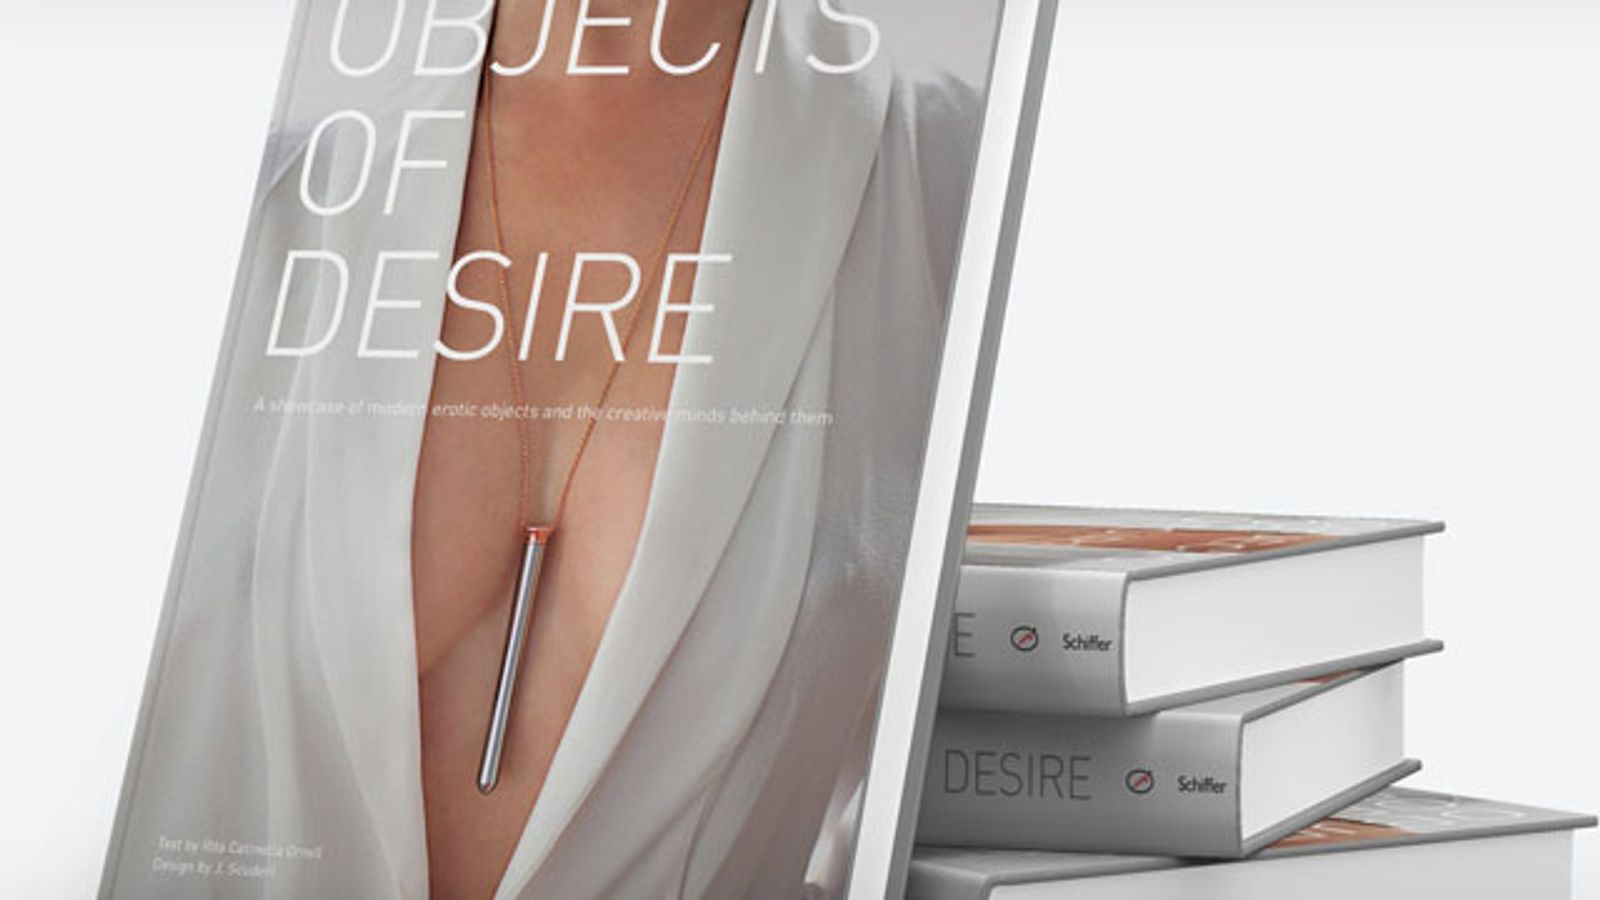 ‘Objects of Desire’ Coffee Table Book Highlights Pleasure Product Industry